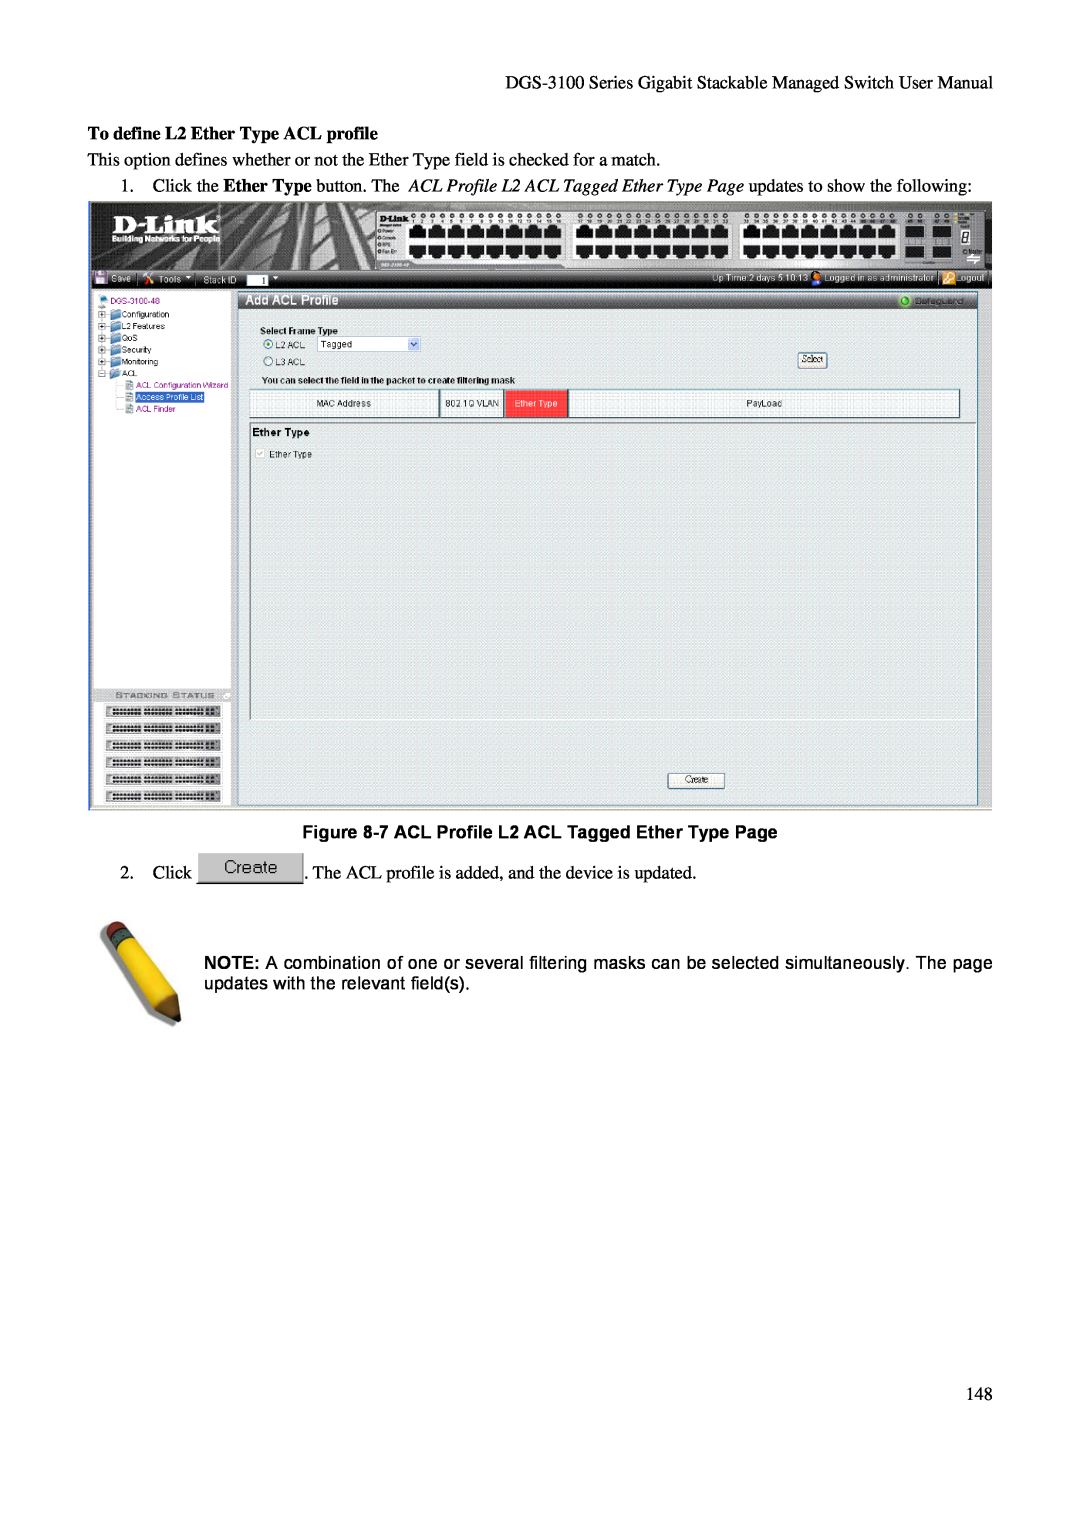 D-Link DGS-3100 user manual To define L2 Ether Type ACL profile, 7 ACL Profile L2 ACL Tagged Ether Type Page 